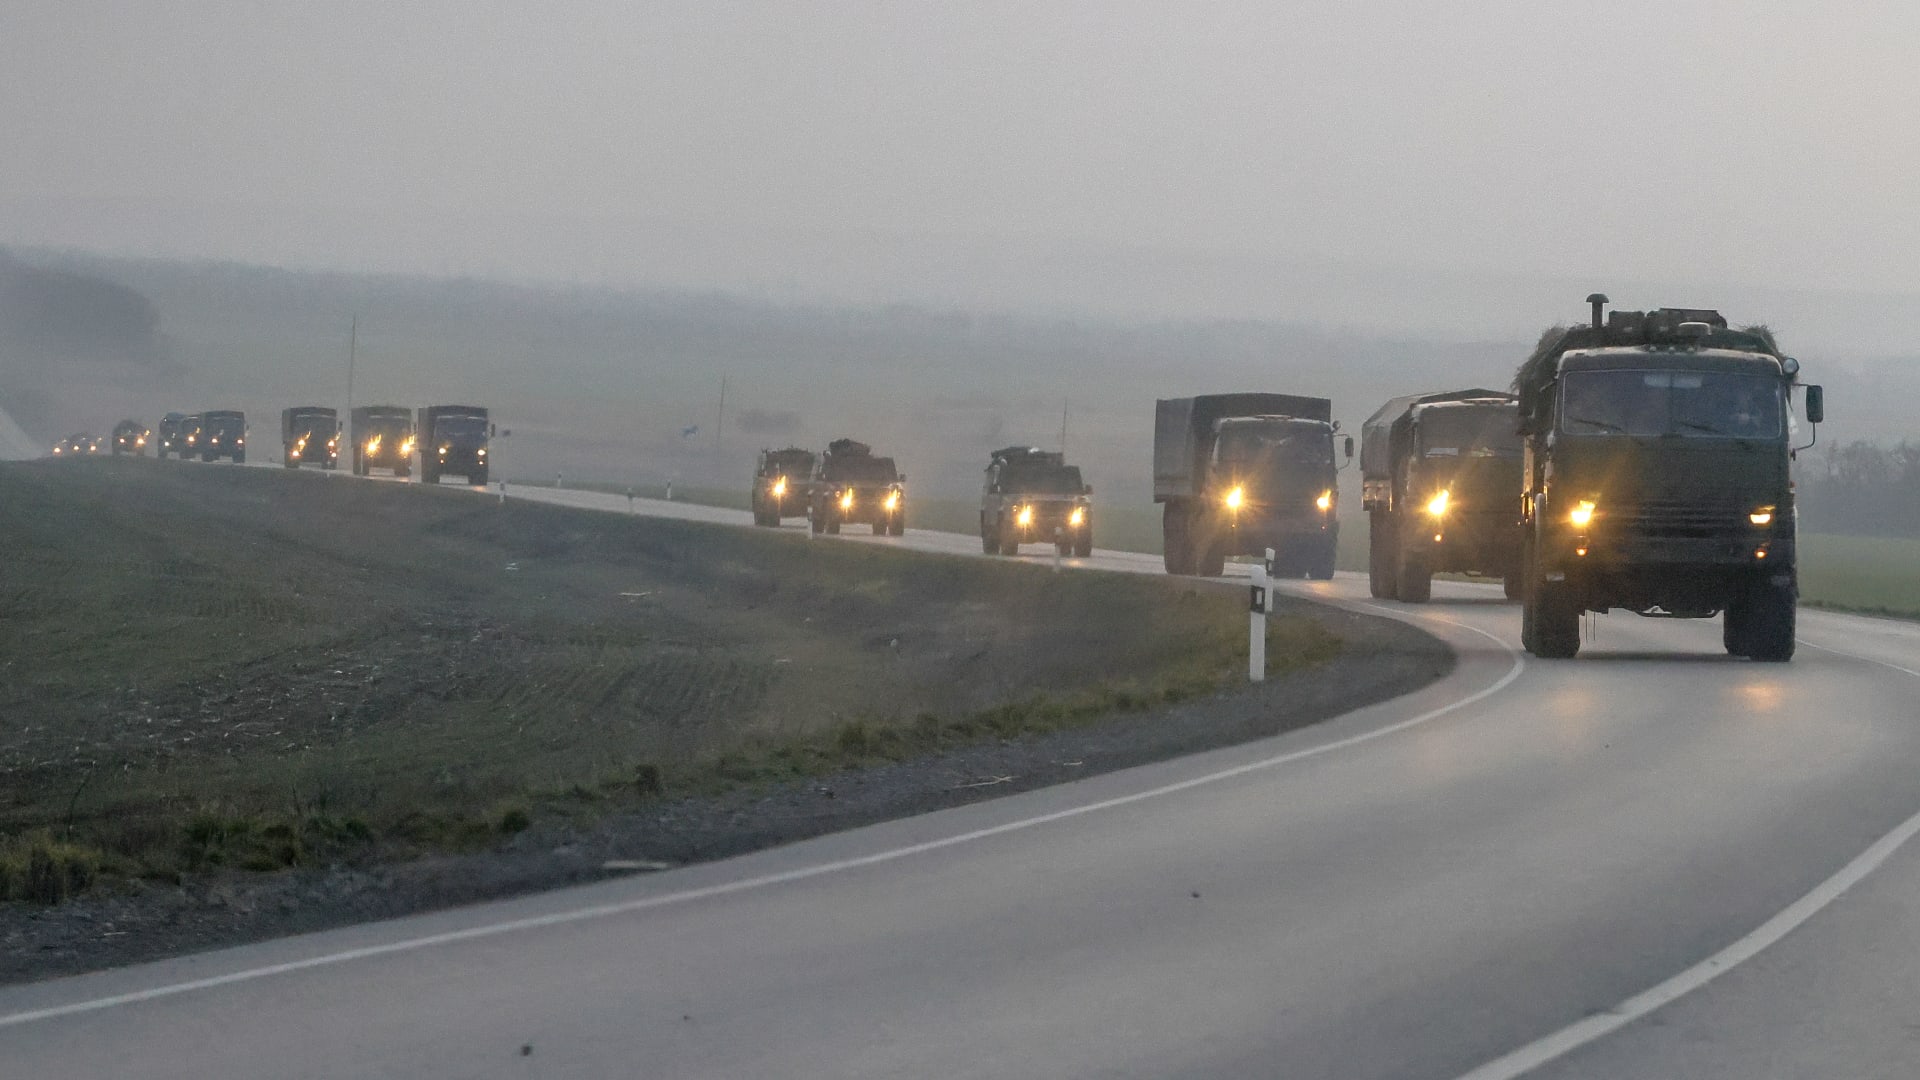 A convoy of Russian military vehicles move towards the border in the Donbas region of eastern Ukraine on February 23, 2022.